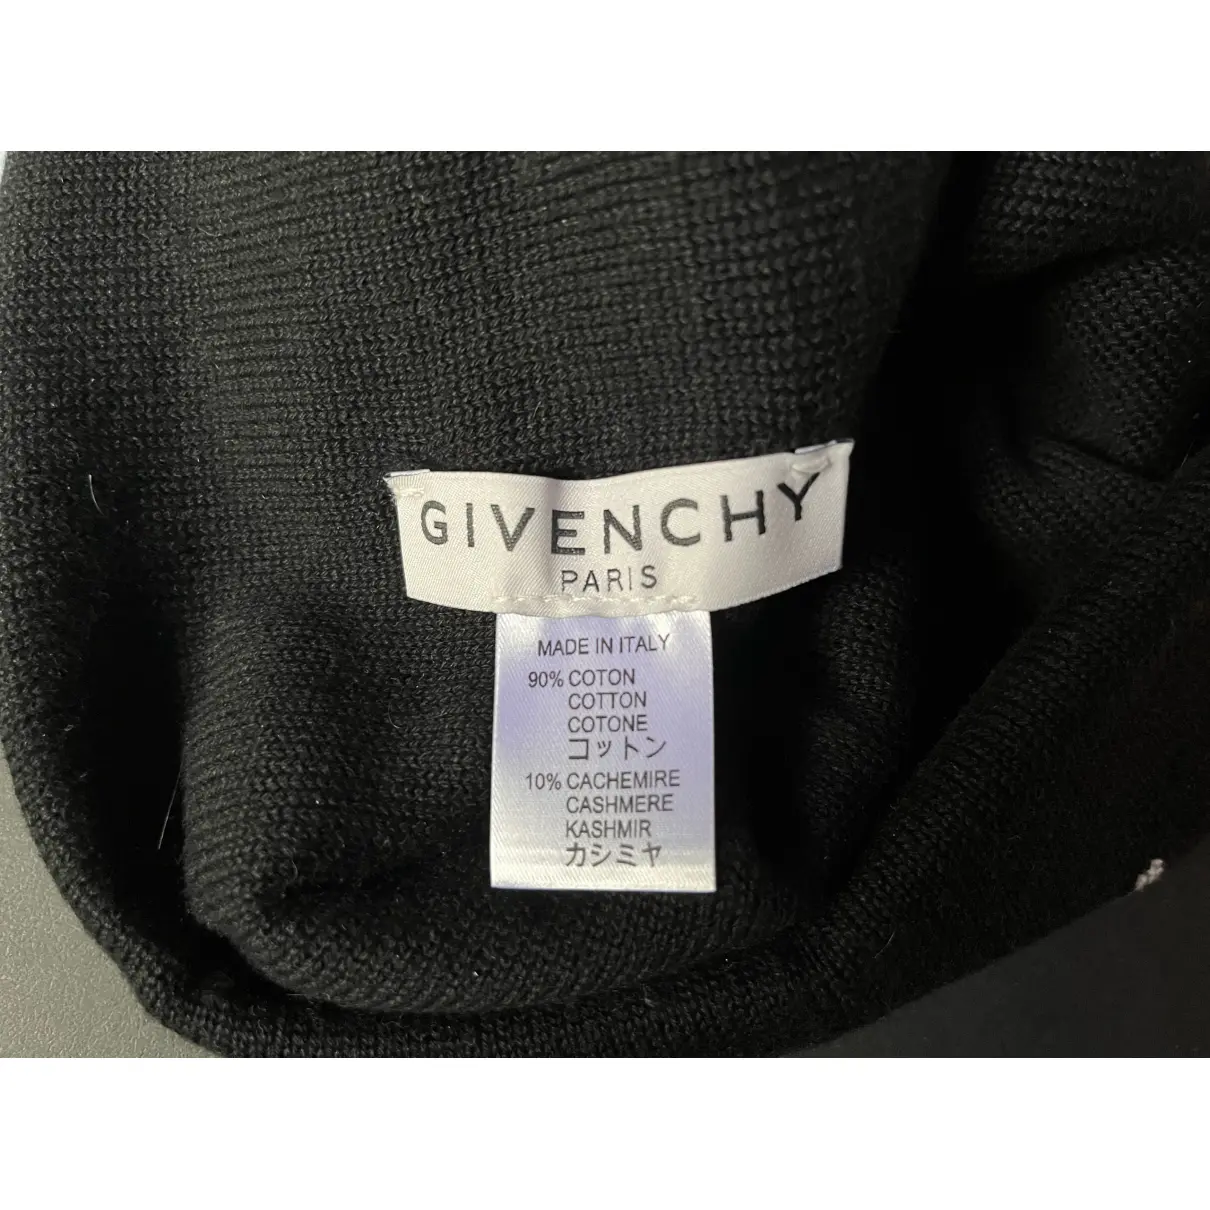 Luxury Givenchy Hats & pull on hats Men